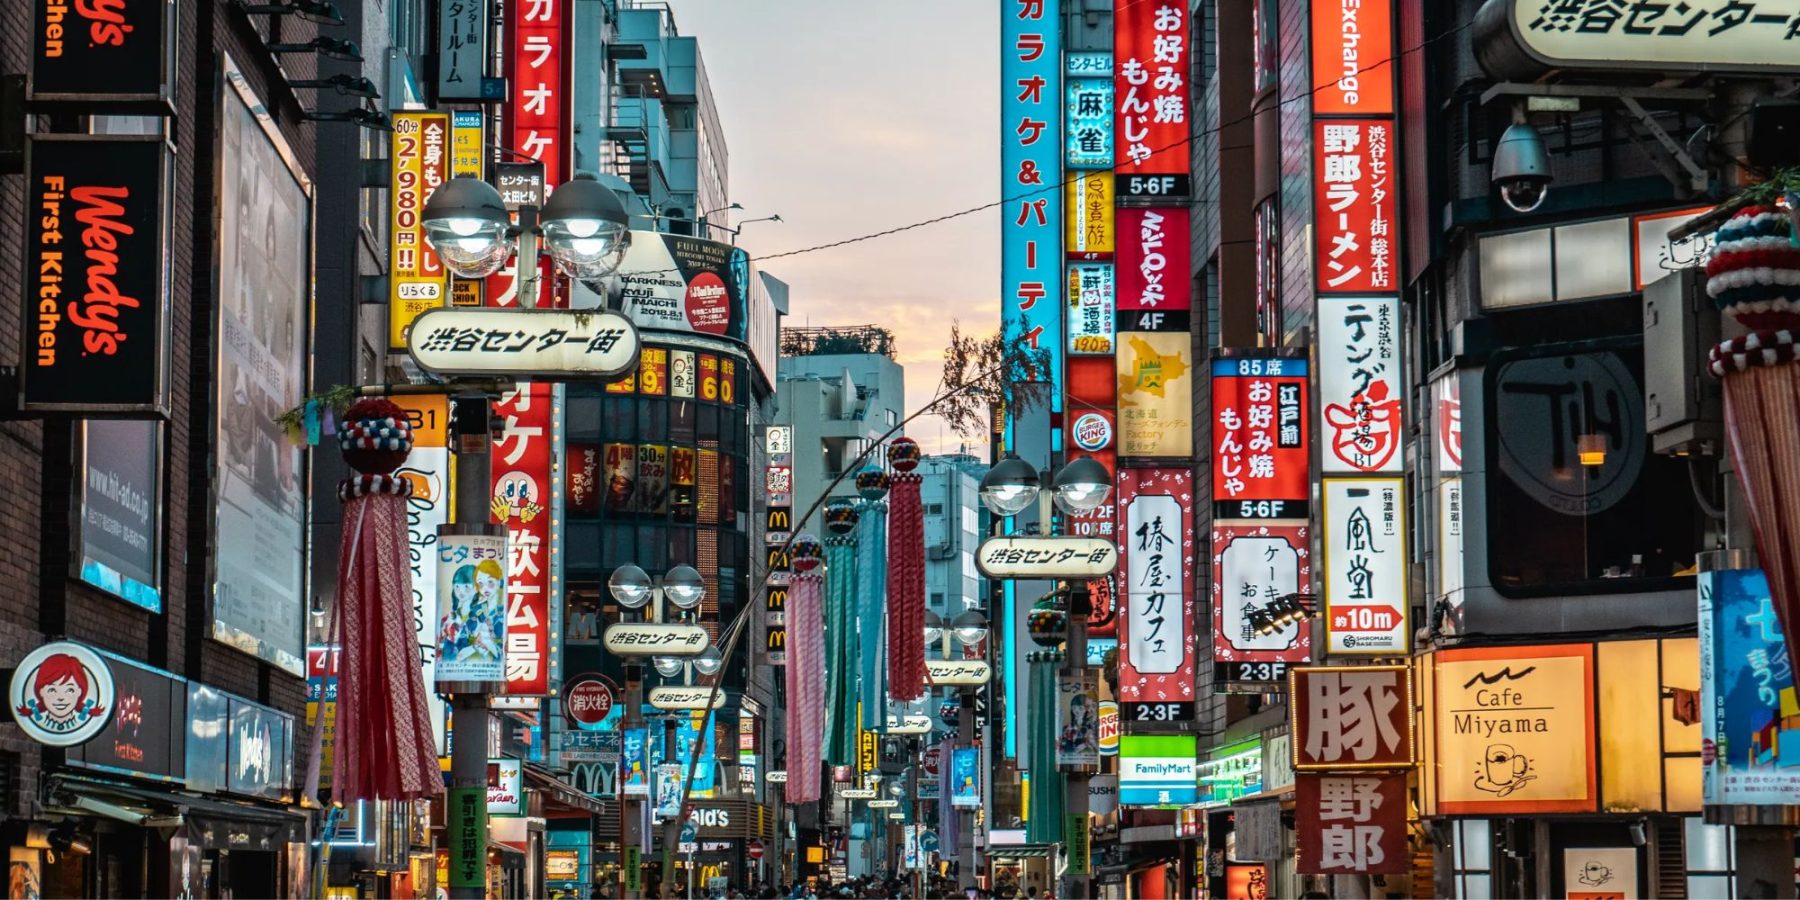 Scene of tokyo with neon signs.